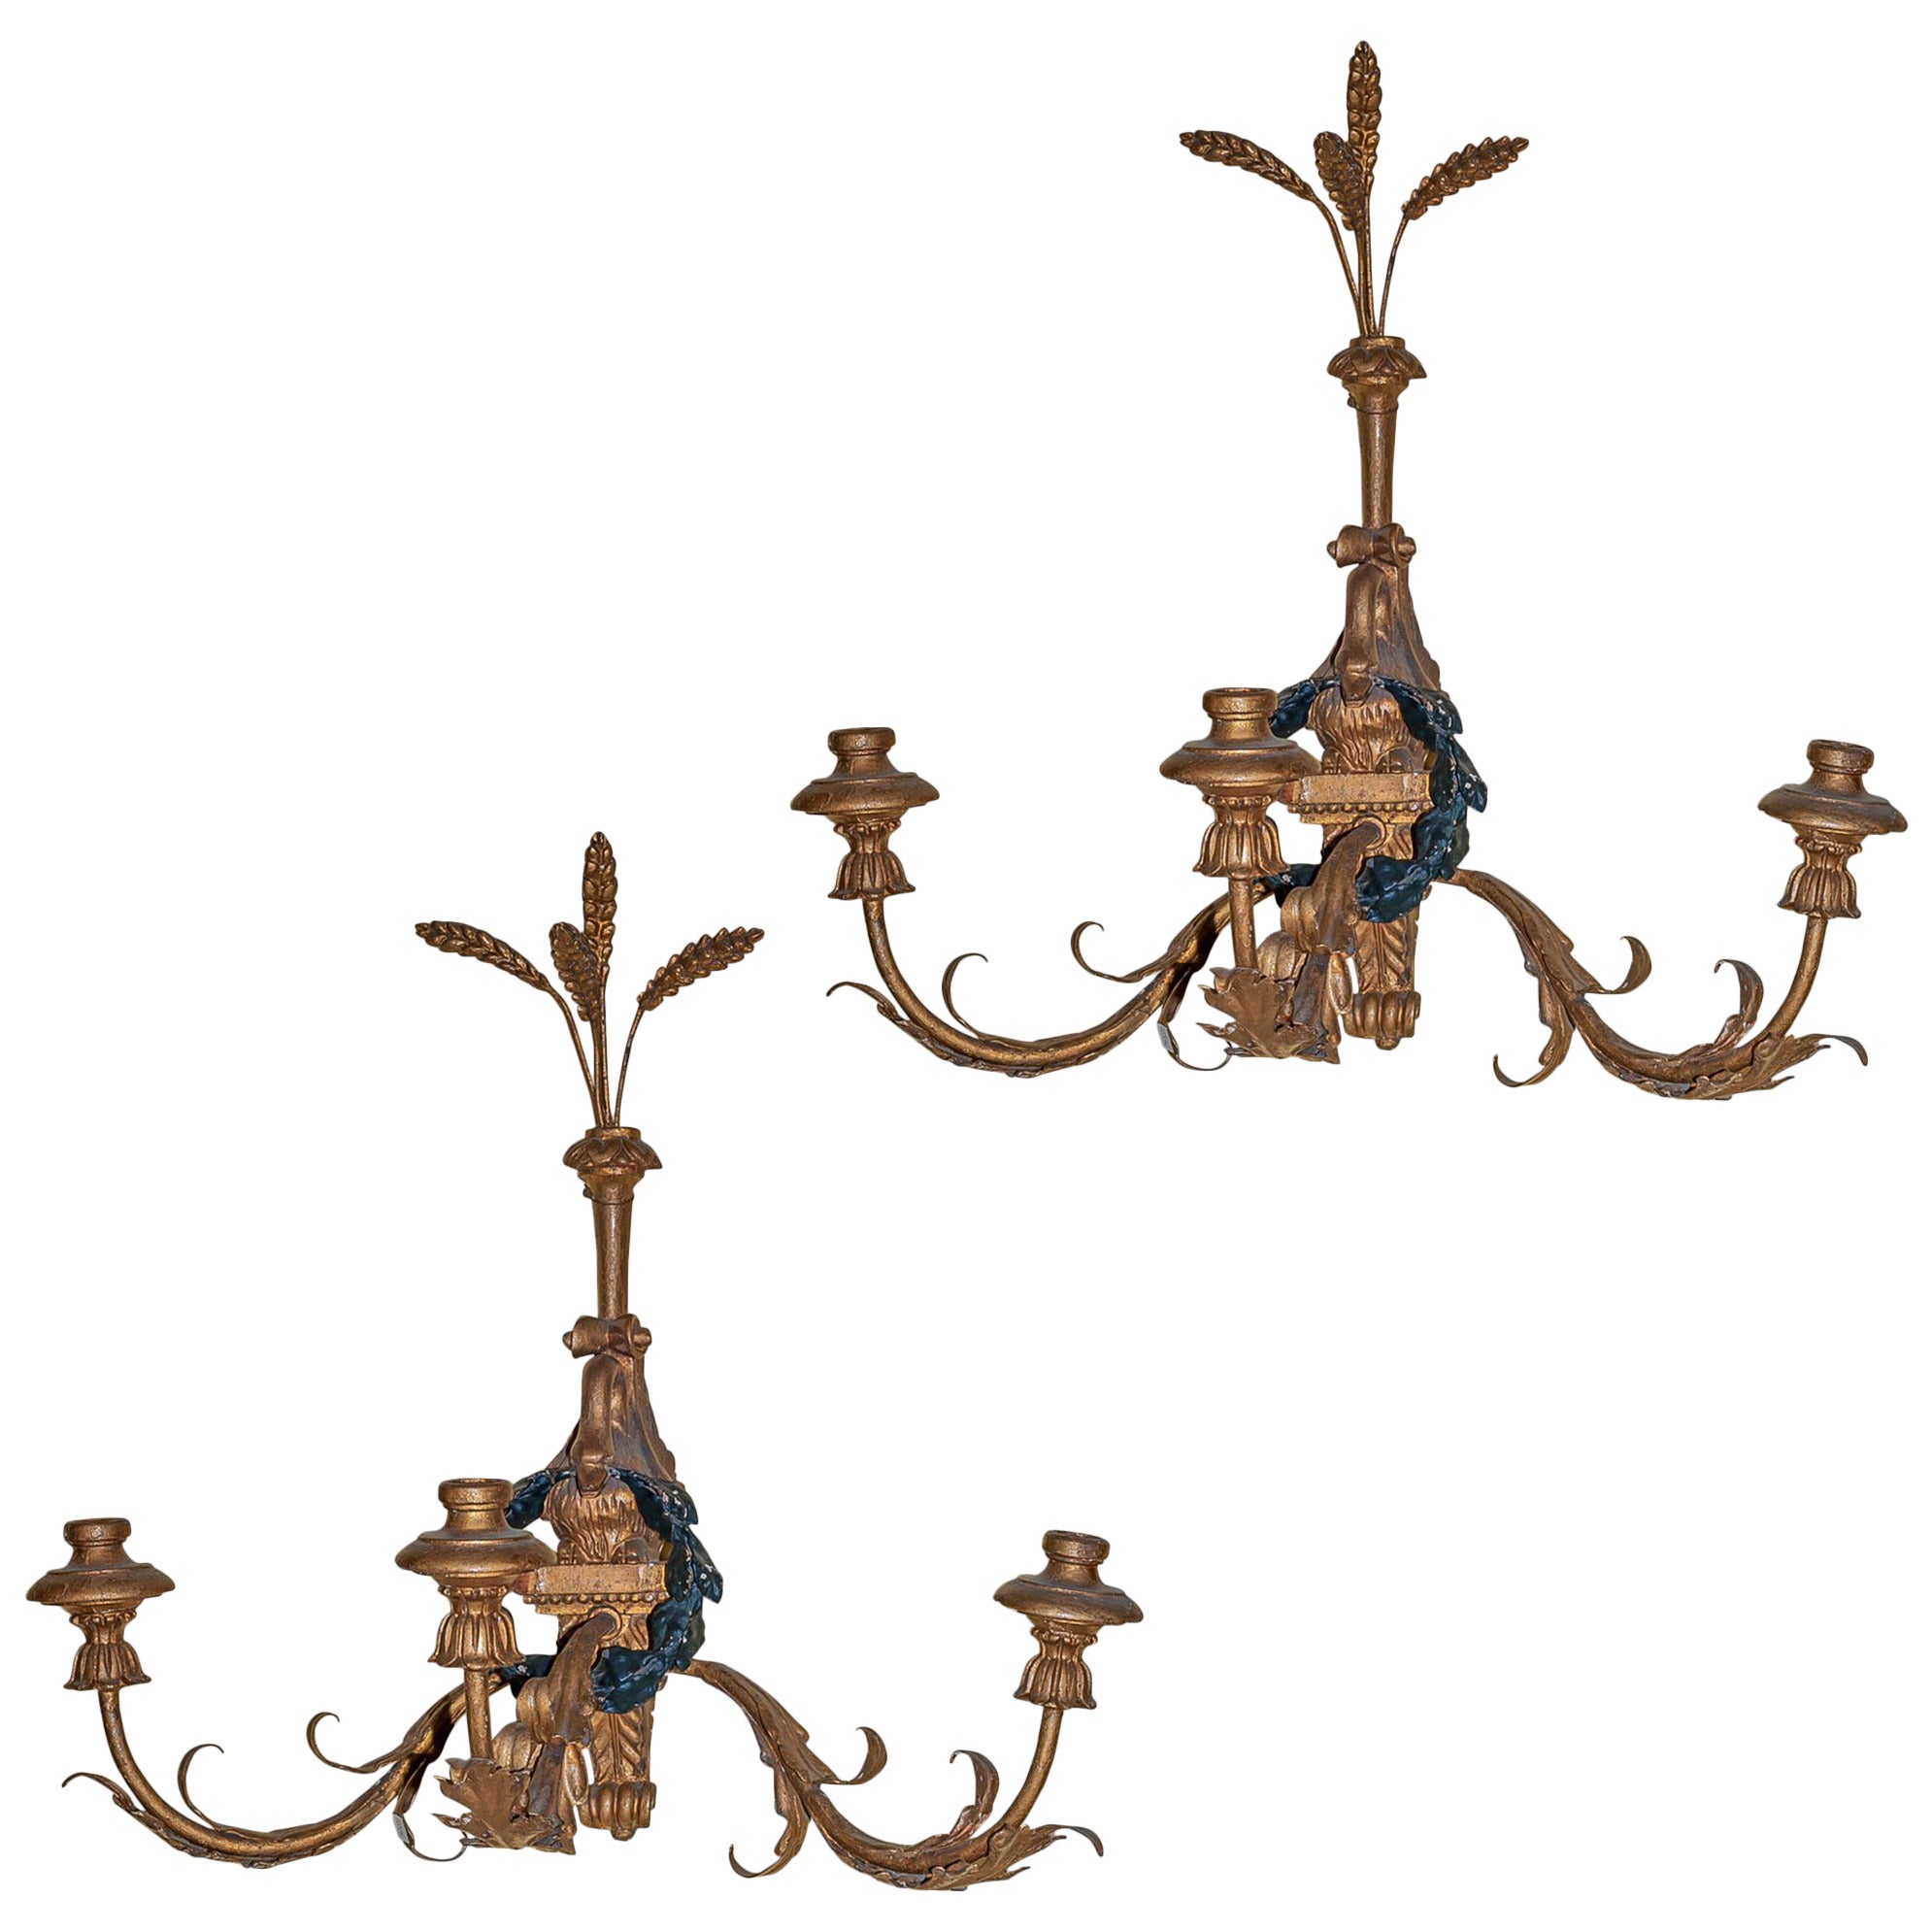 Pair of Giltwood and Tole Three-Arm Wall Light Sconces